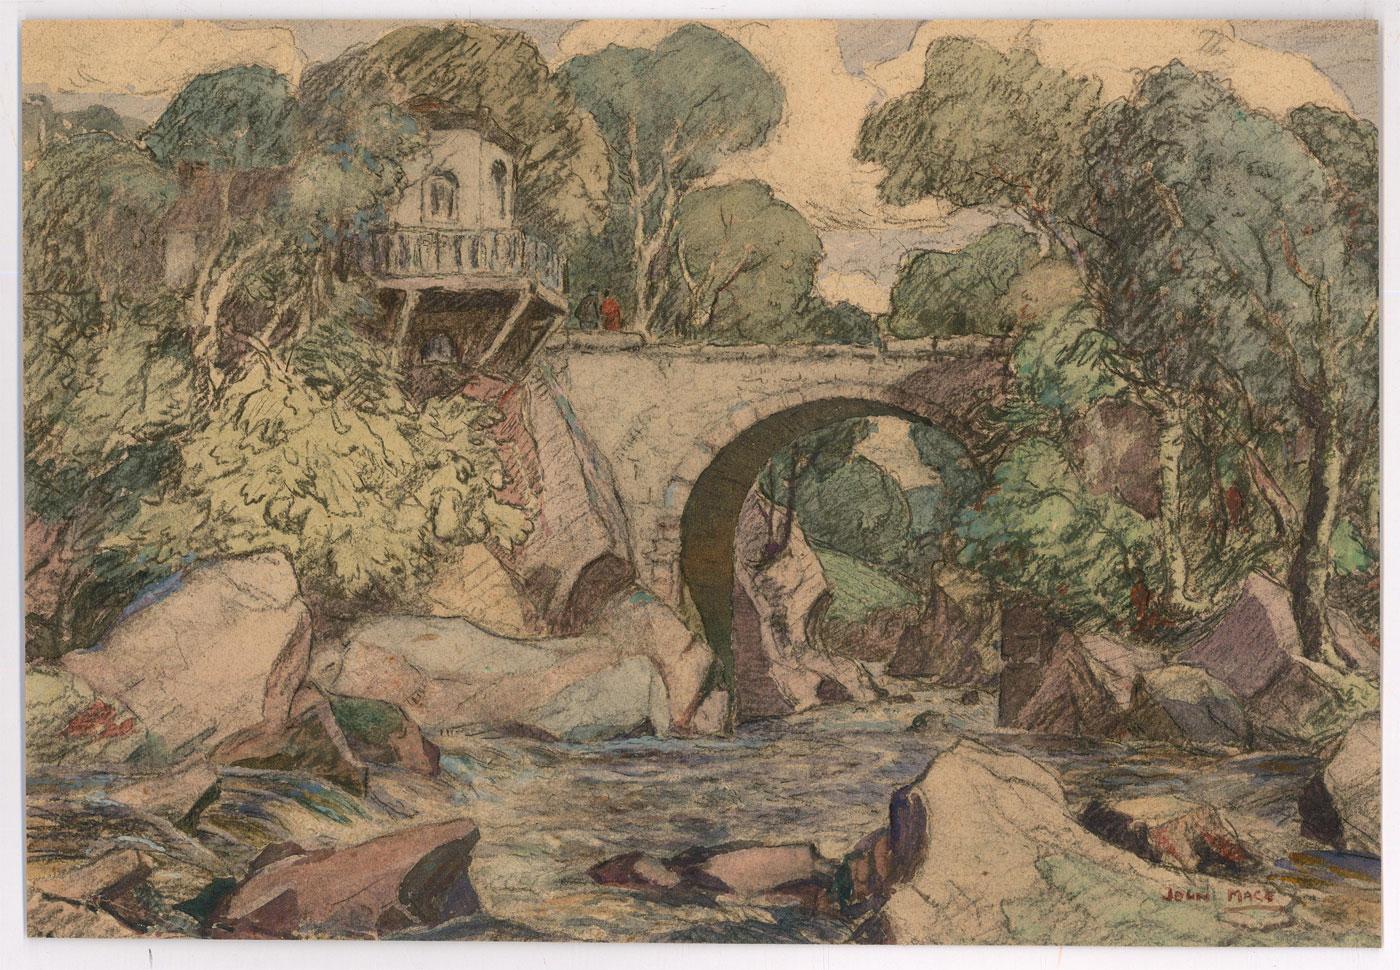 A well drawn study of a stone bridge by the artist John Mace. Completed with charcoal detail and touches of gouache. Signed to the lower right corner. On paper.
